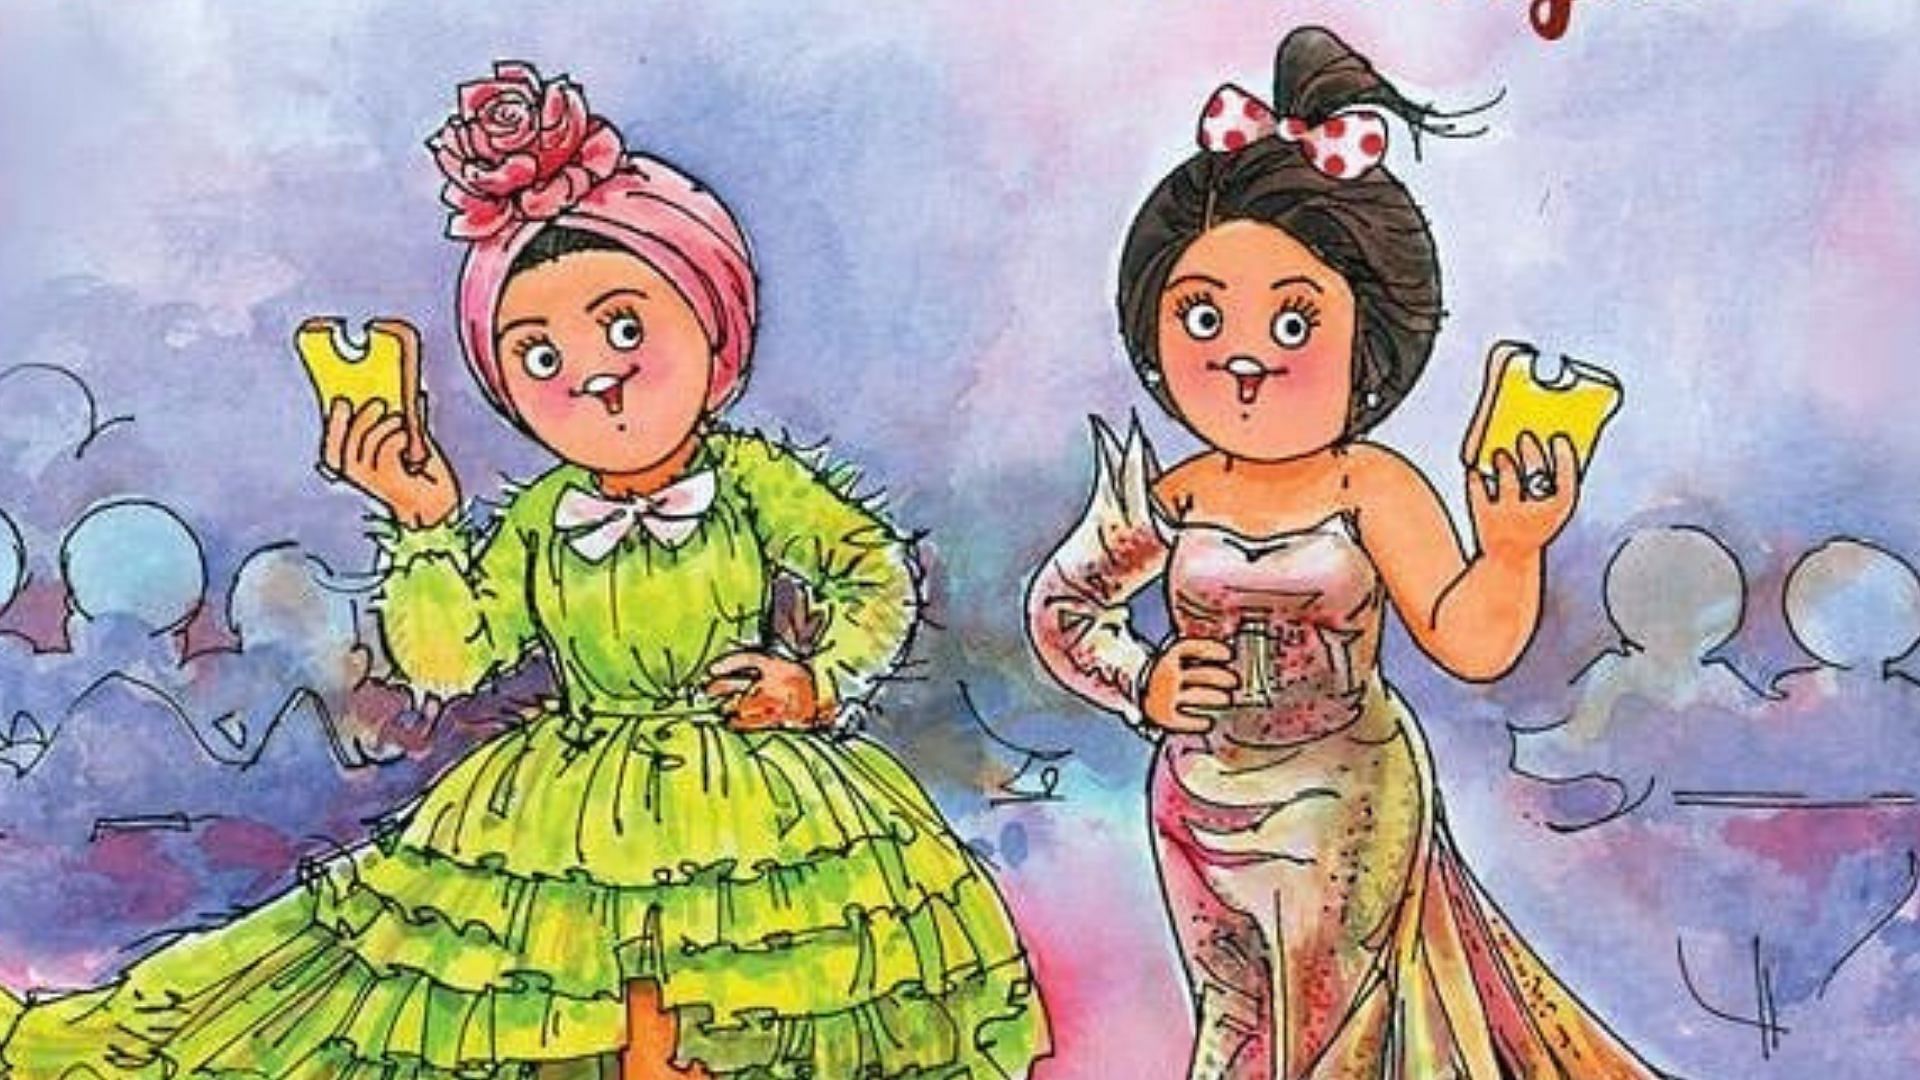 Amul featured a creative ad based on Deepika and Aishwarya’s red carpet looks at Cannes 2019.